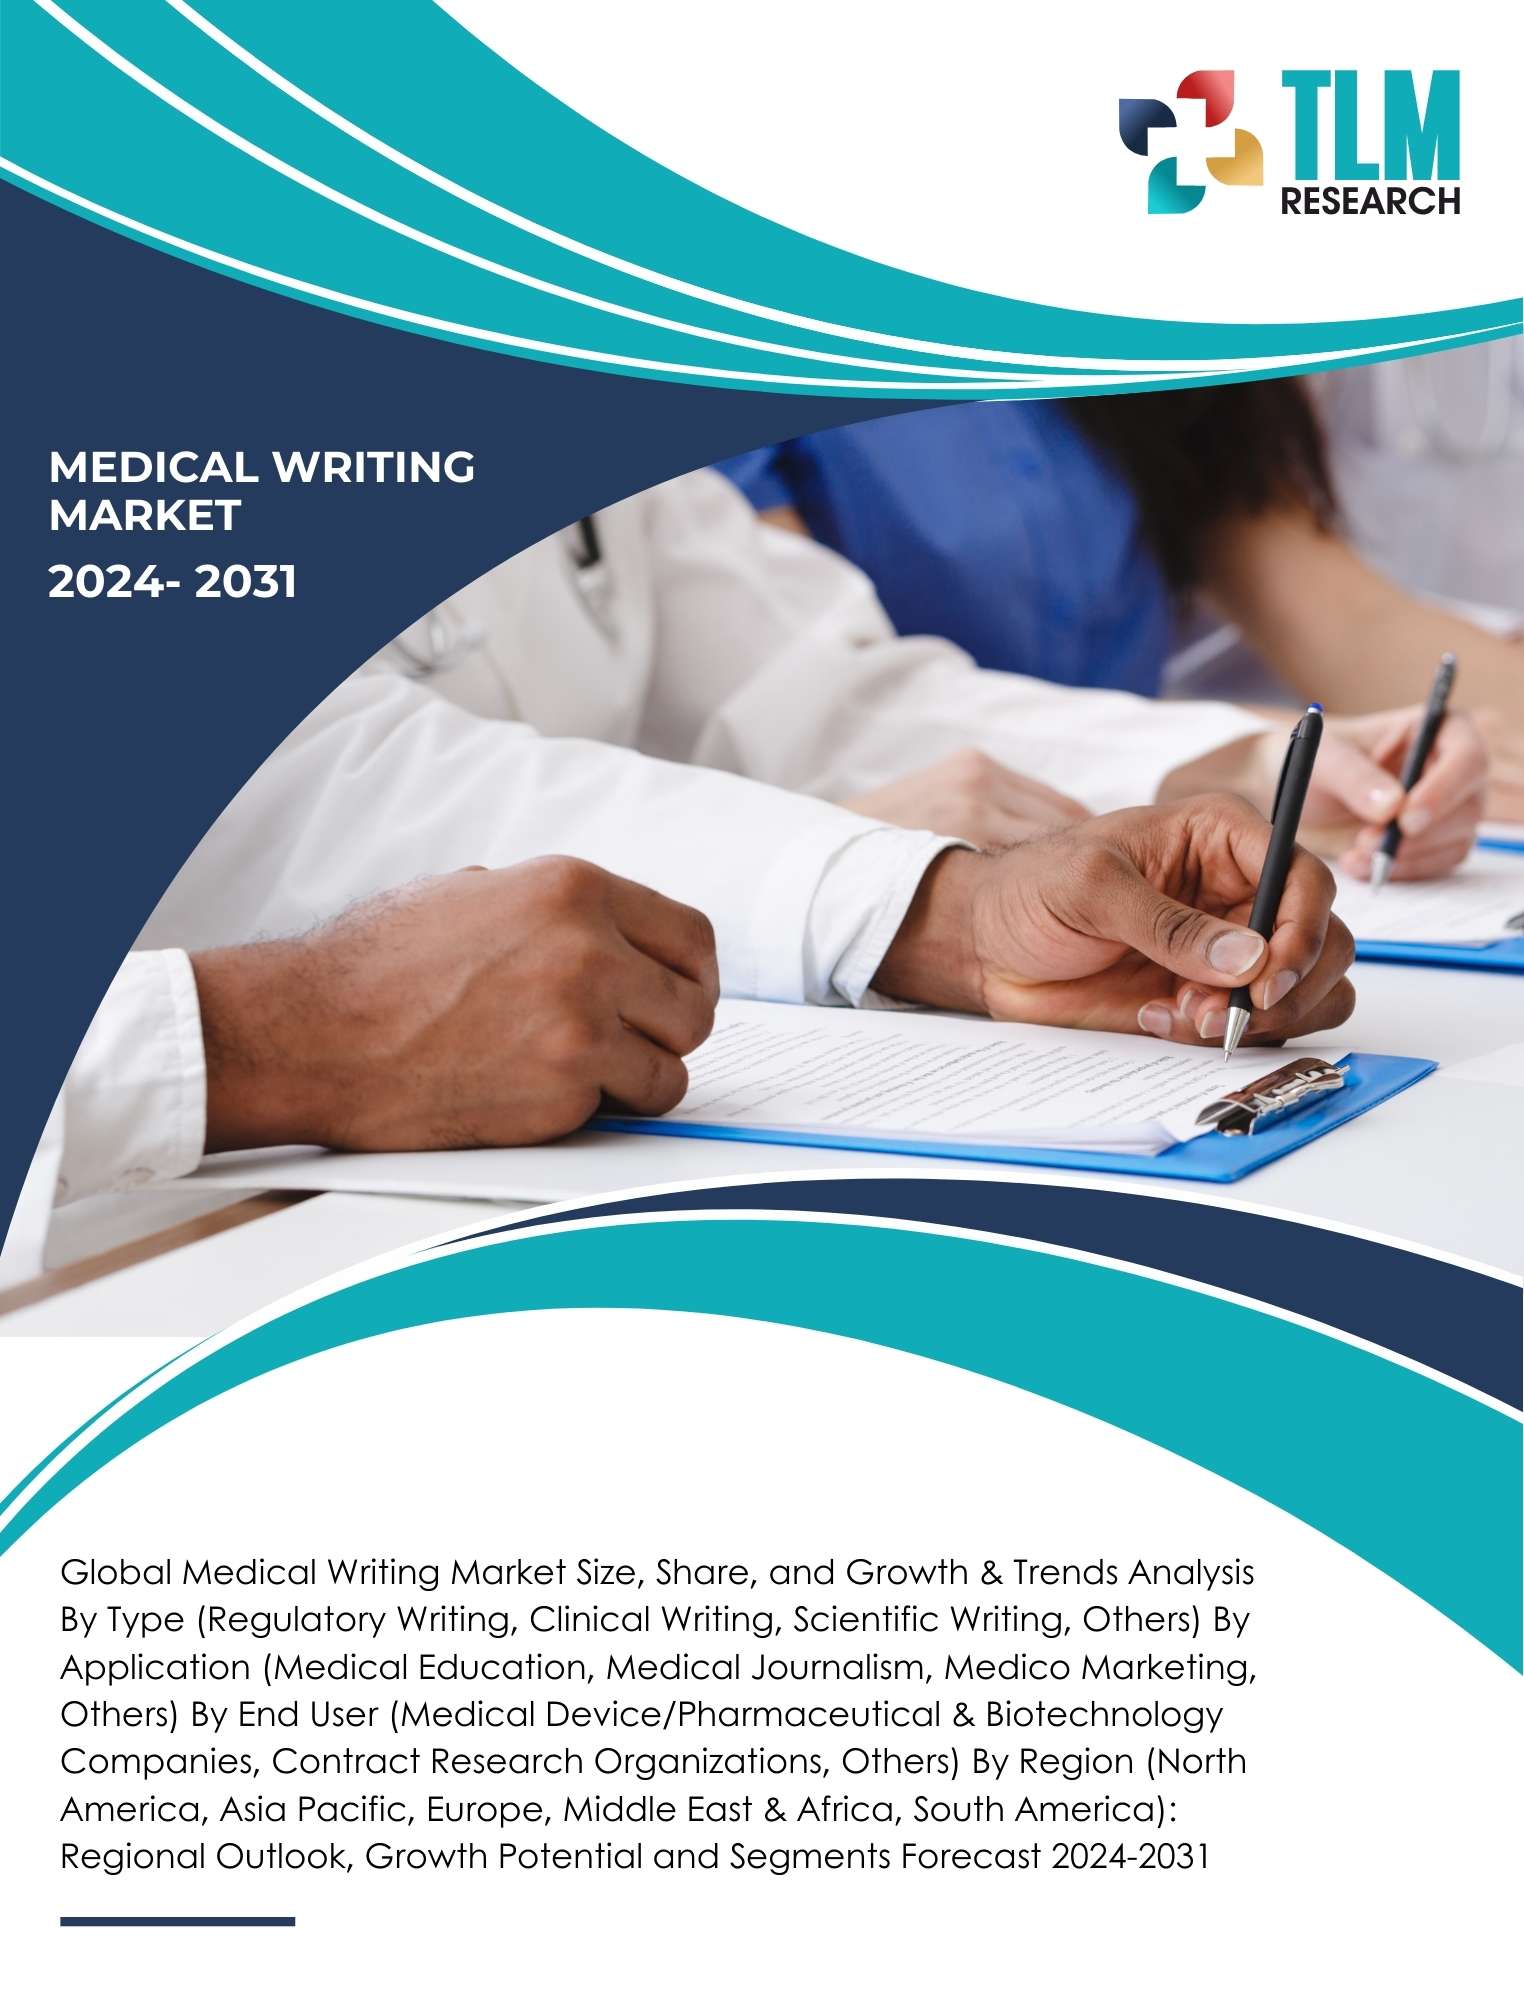 Medical Writing Market Size, Demand & Forecast By 2031 | TLM Research